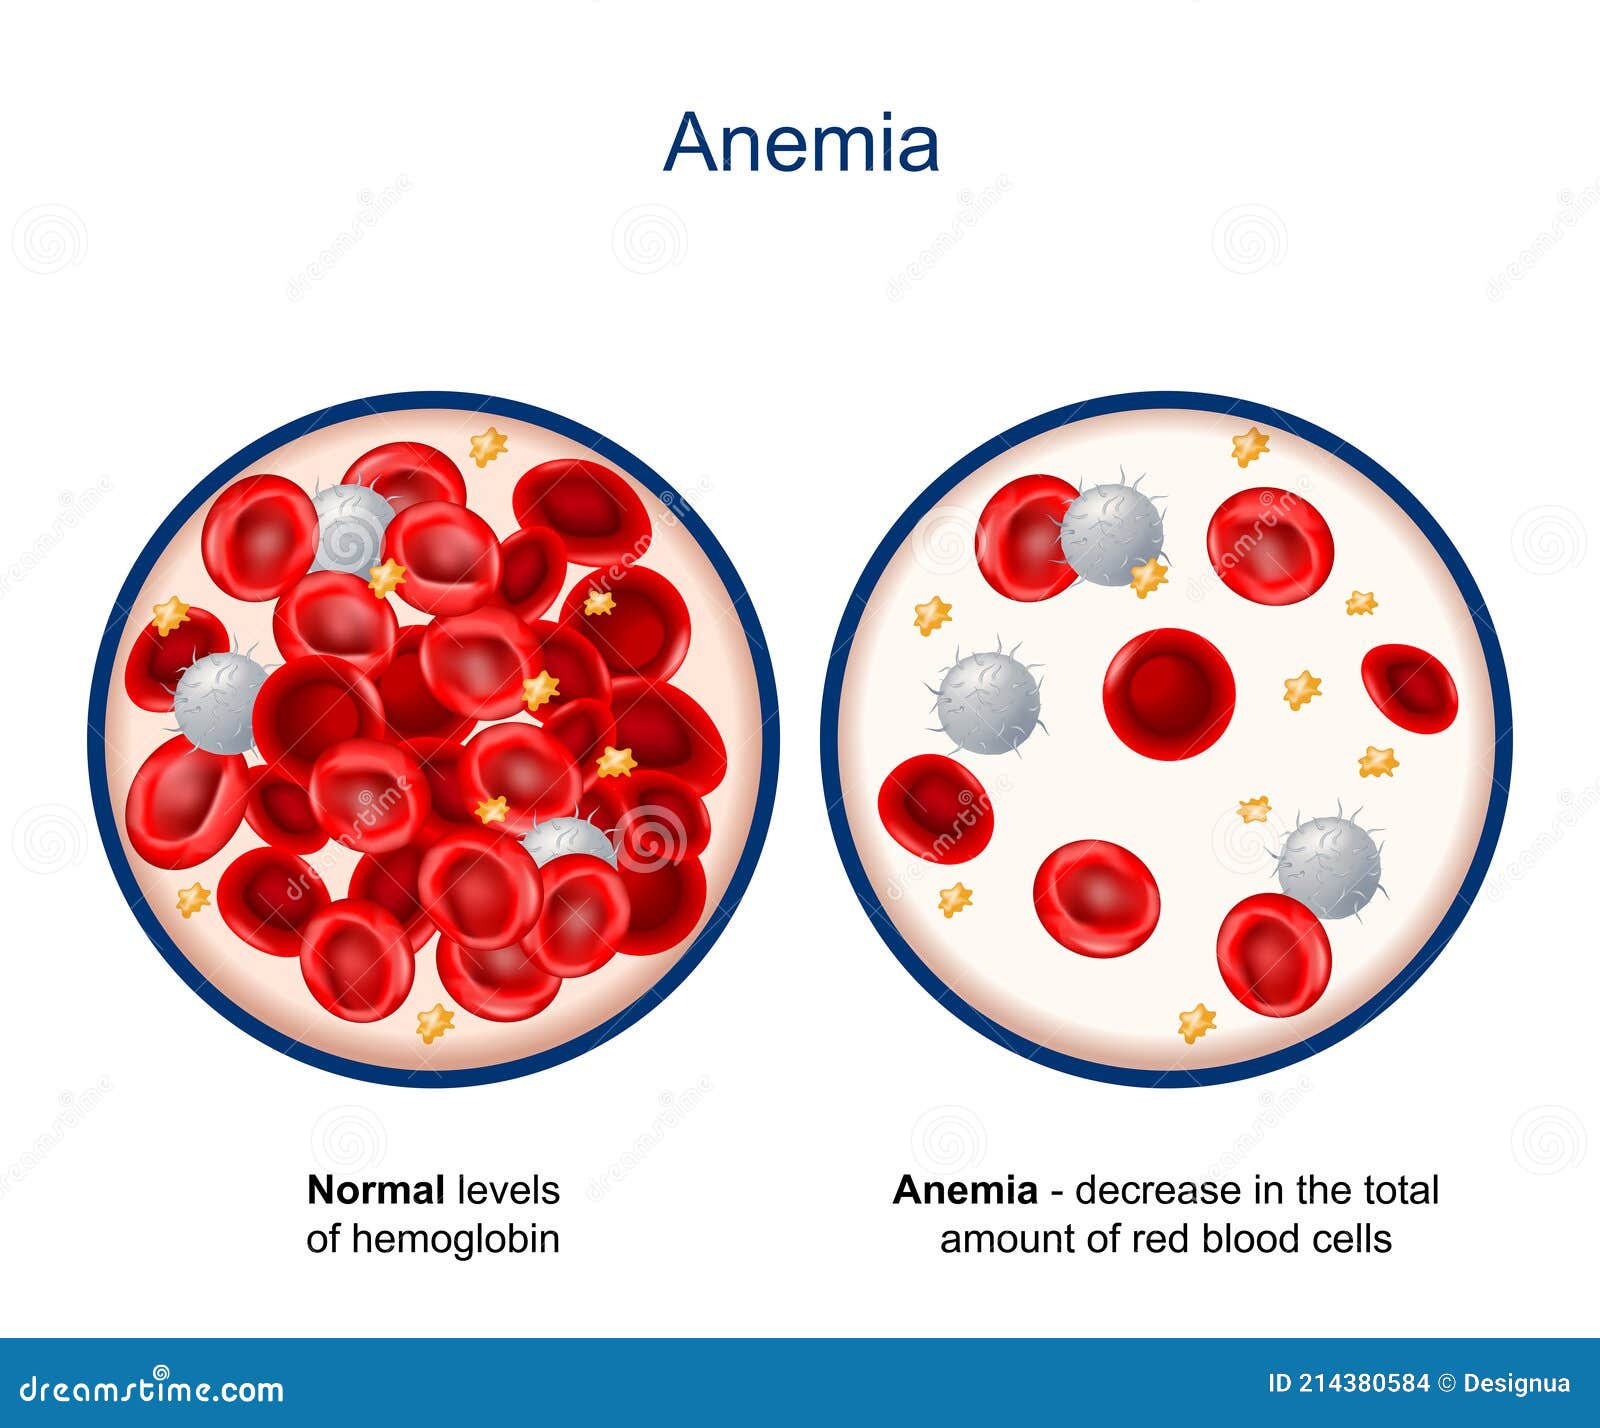 anemia. close-up of blood vessel with erythrocyte, platelets and white blood cells lymphocytes